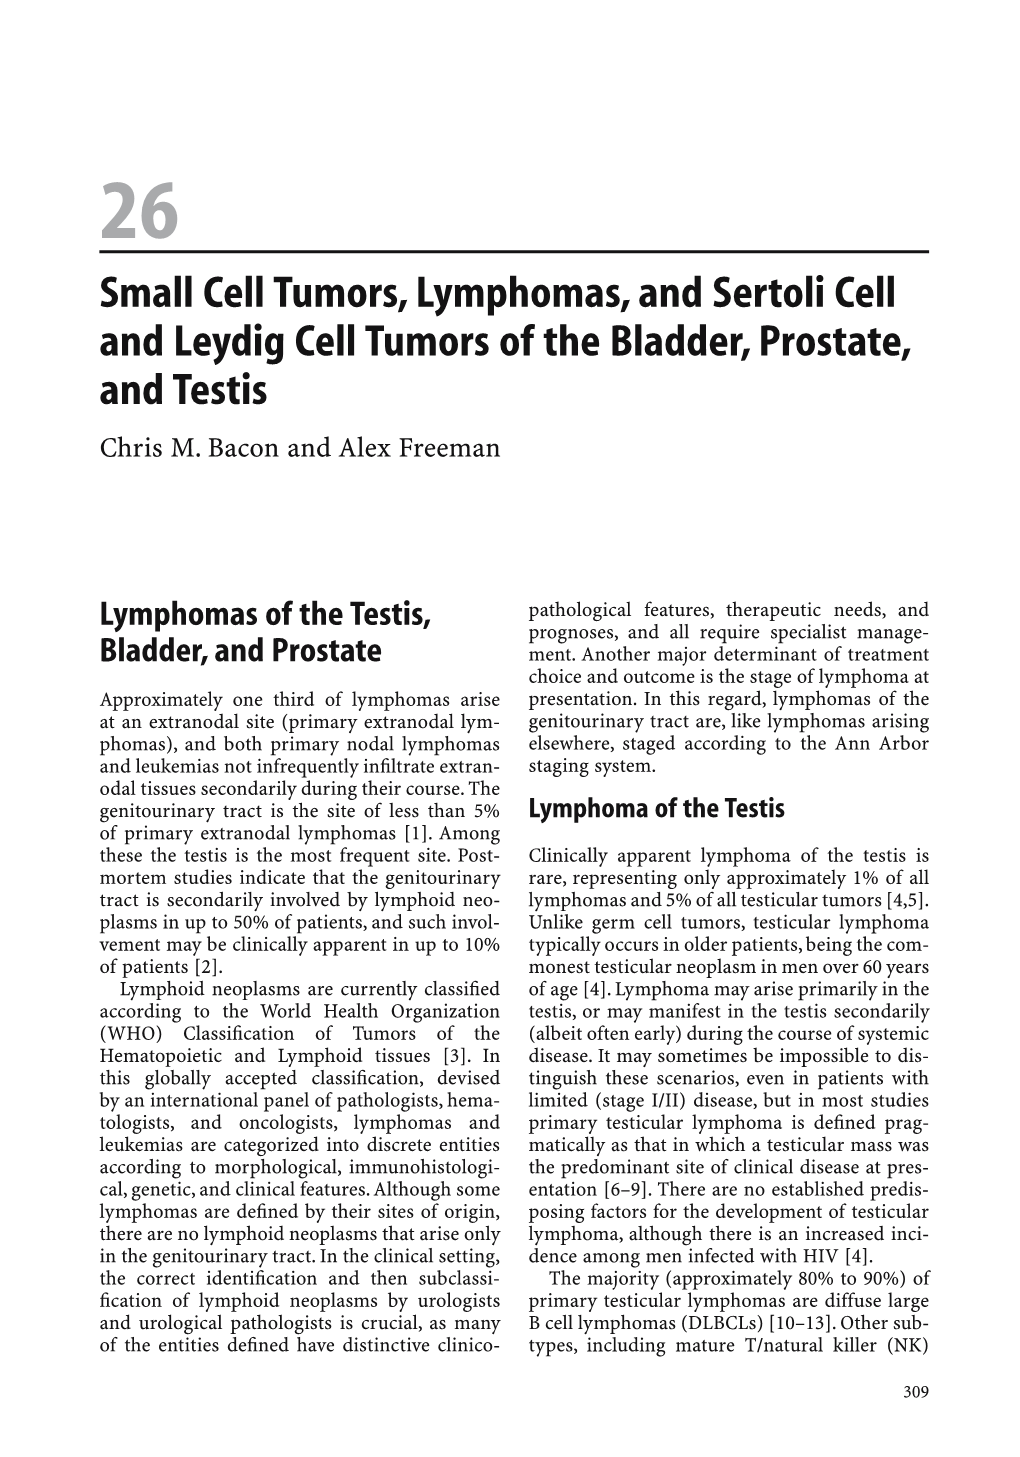 Small Cell Tumors, Lymphomas, and Sertoli Cell and Leydig Cell Tumors of the Bladder, Prostate, and Testis Chris M